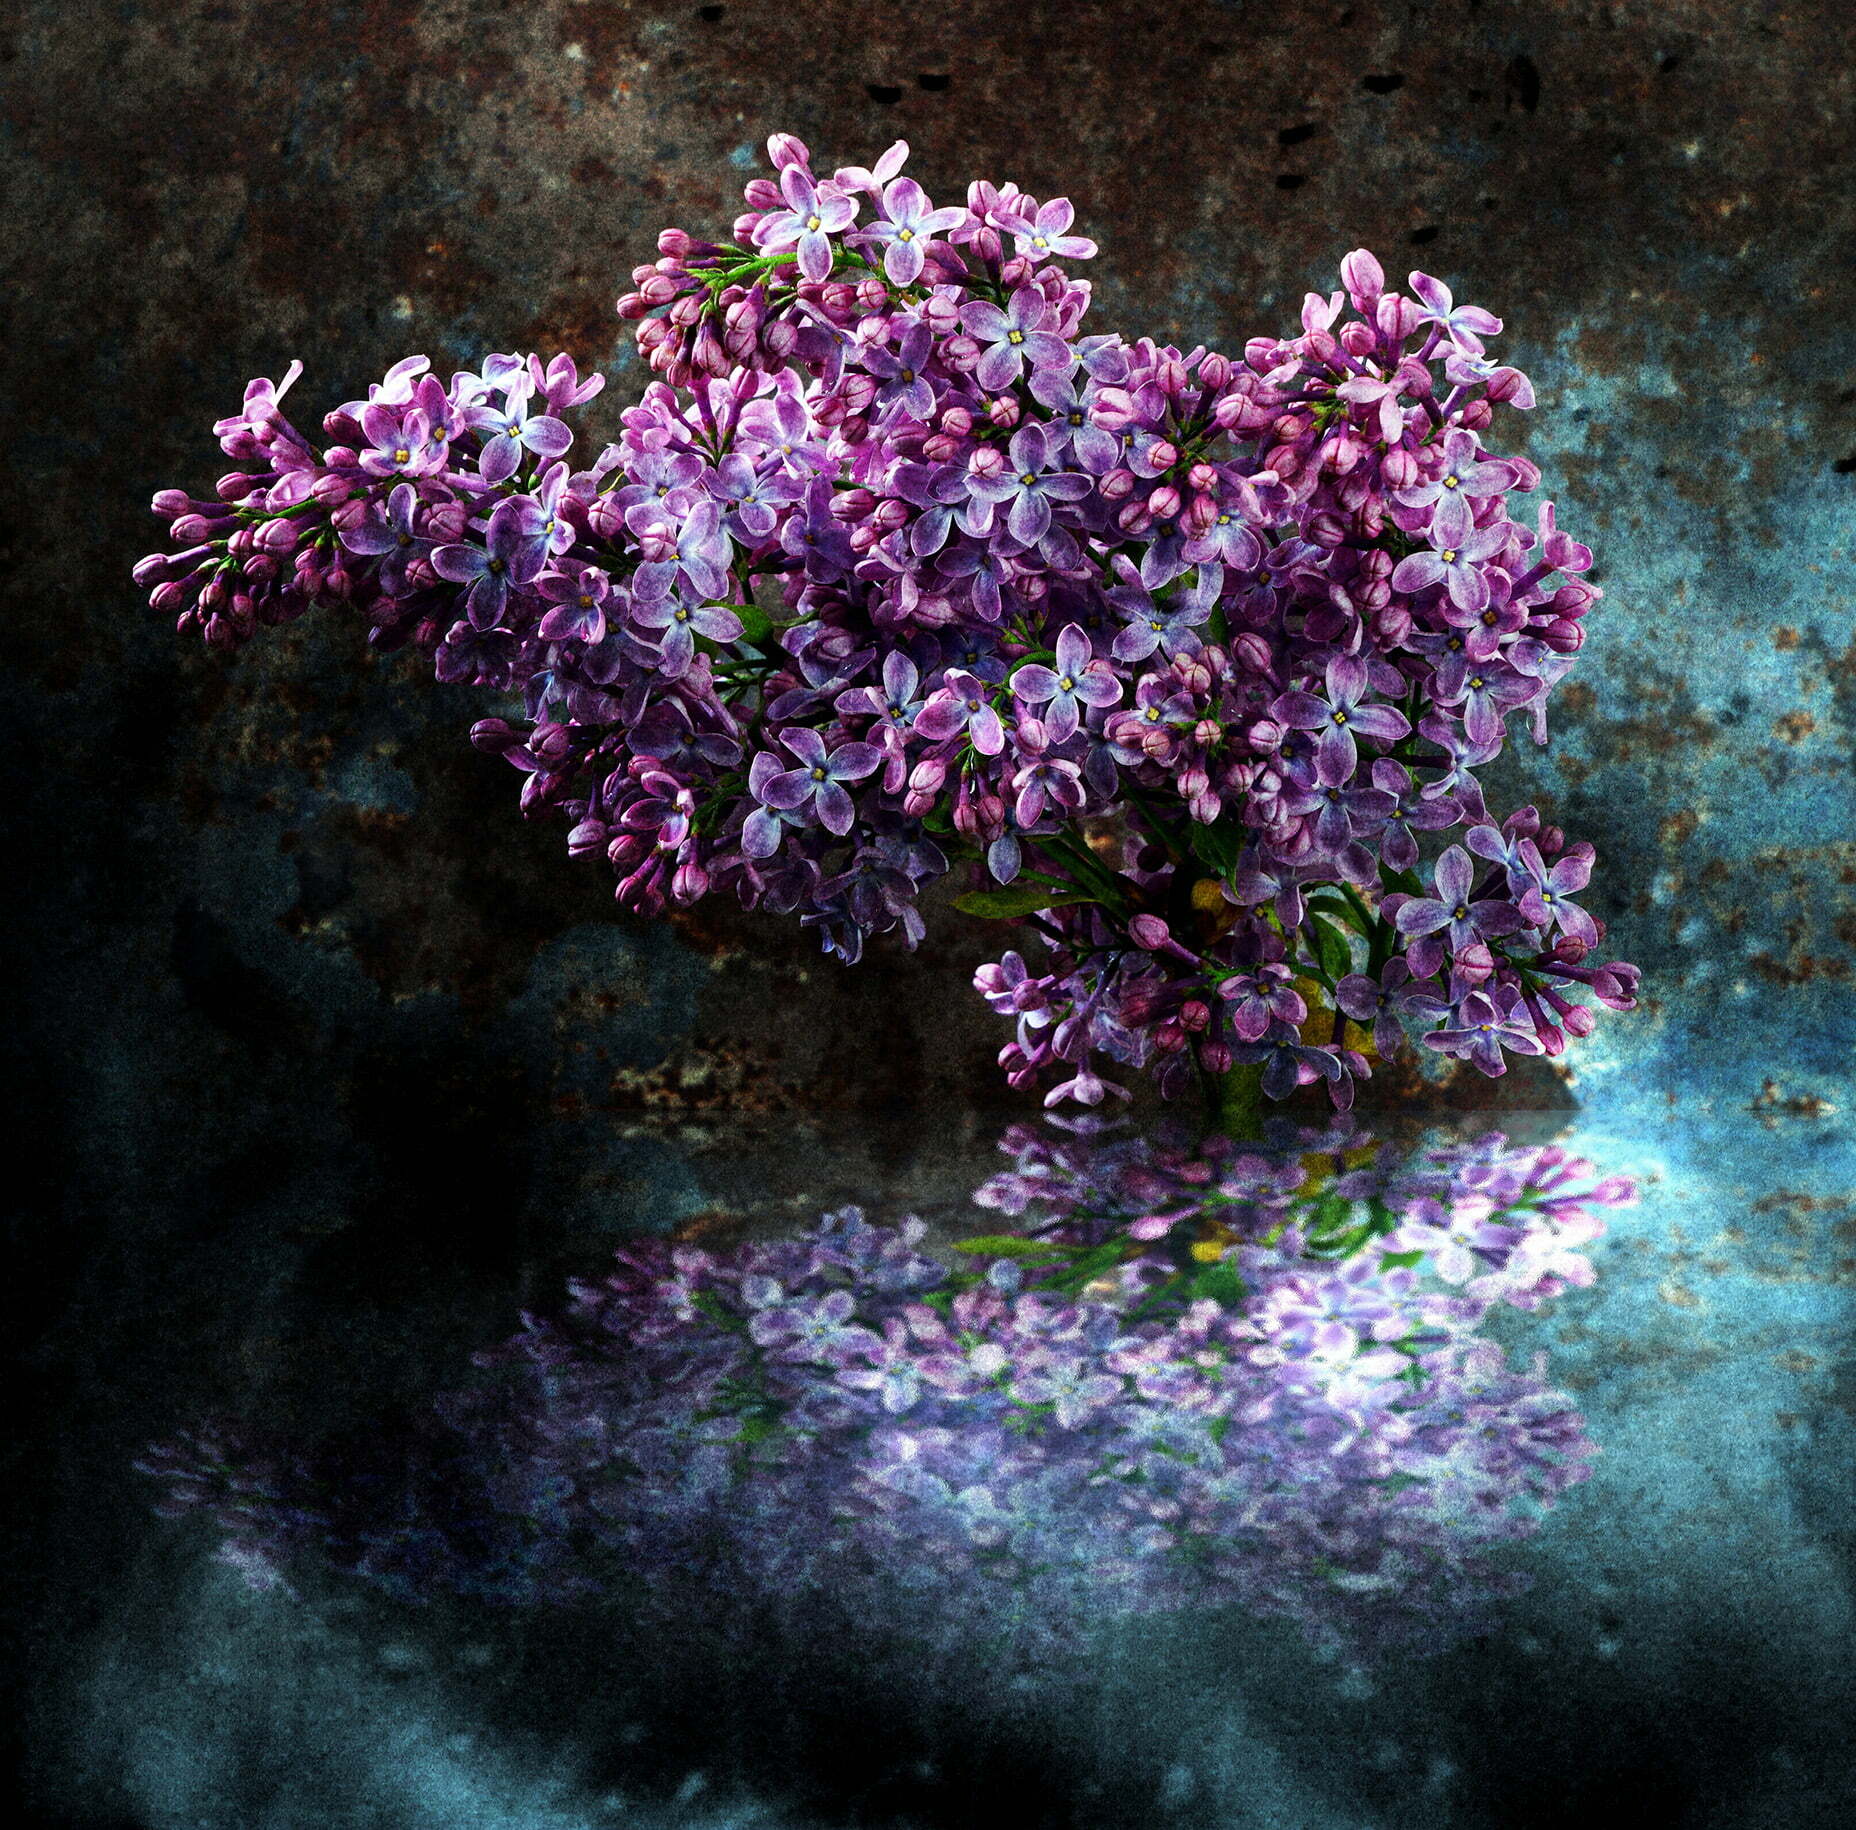 Lilac Sprig - Photographer Name: Martin Rawle - A sprig of lilac from the garden, with reflections.  Copyright: © Martin Rawle, United Kingdom, Shortlist, Open, Object, 2022 Sony World Photography Awards